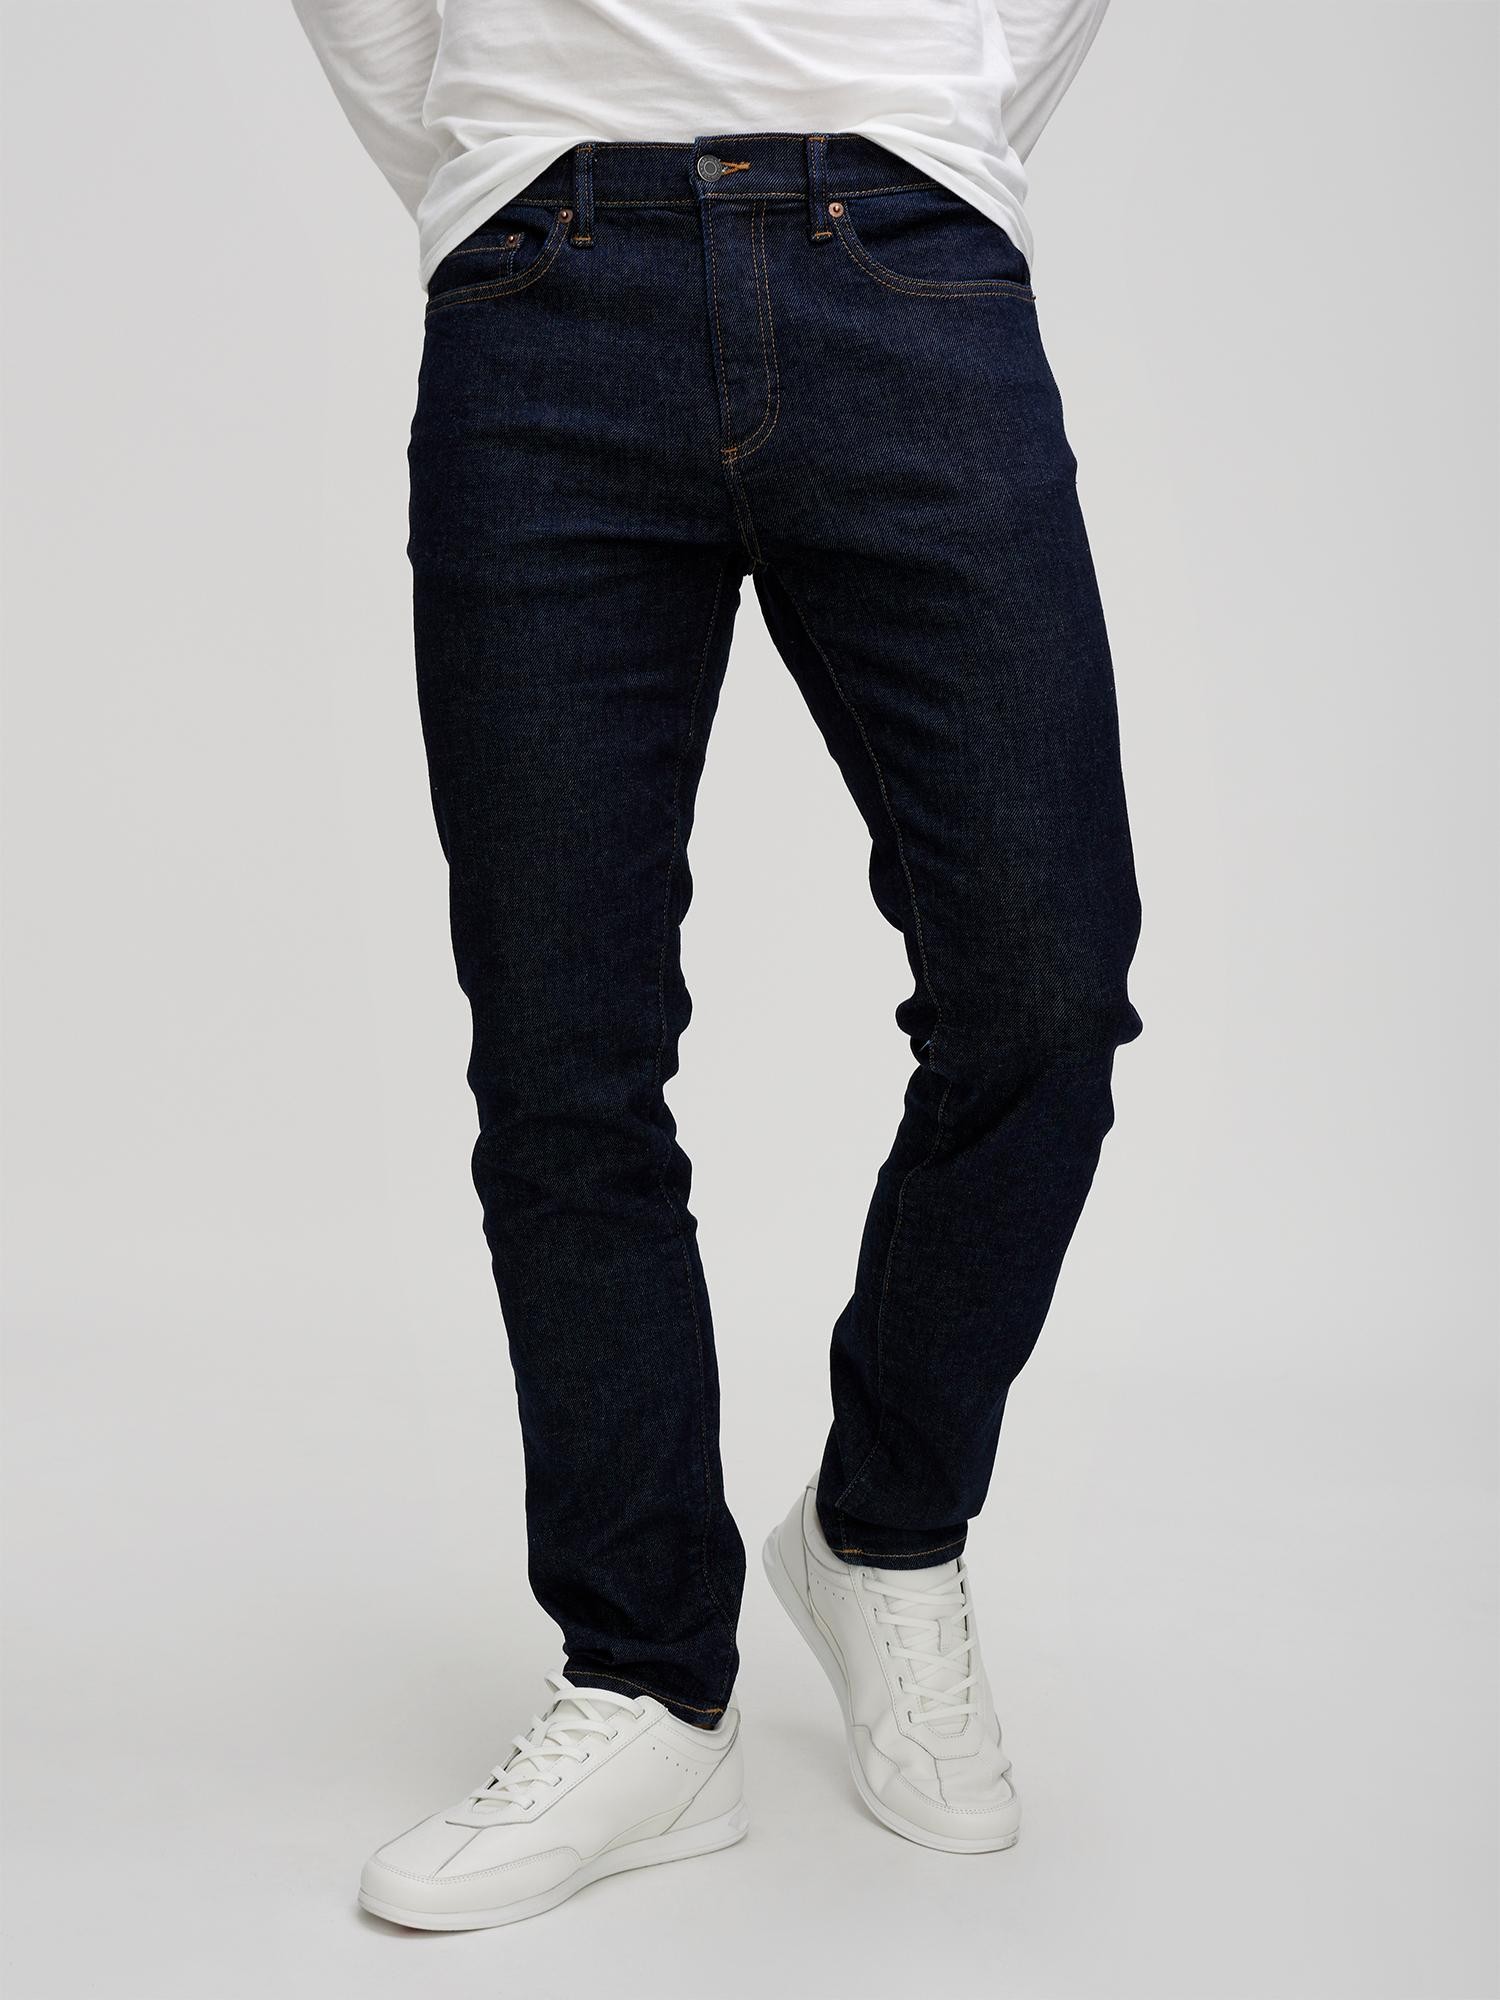 GapFlex Soft Wear Slim Jeans with Washwell by Gap Online, THE ICONIC